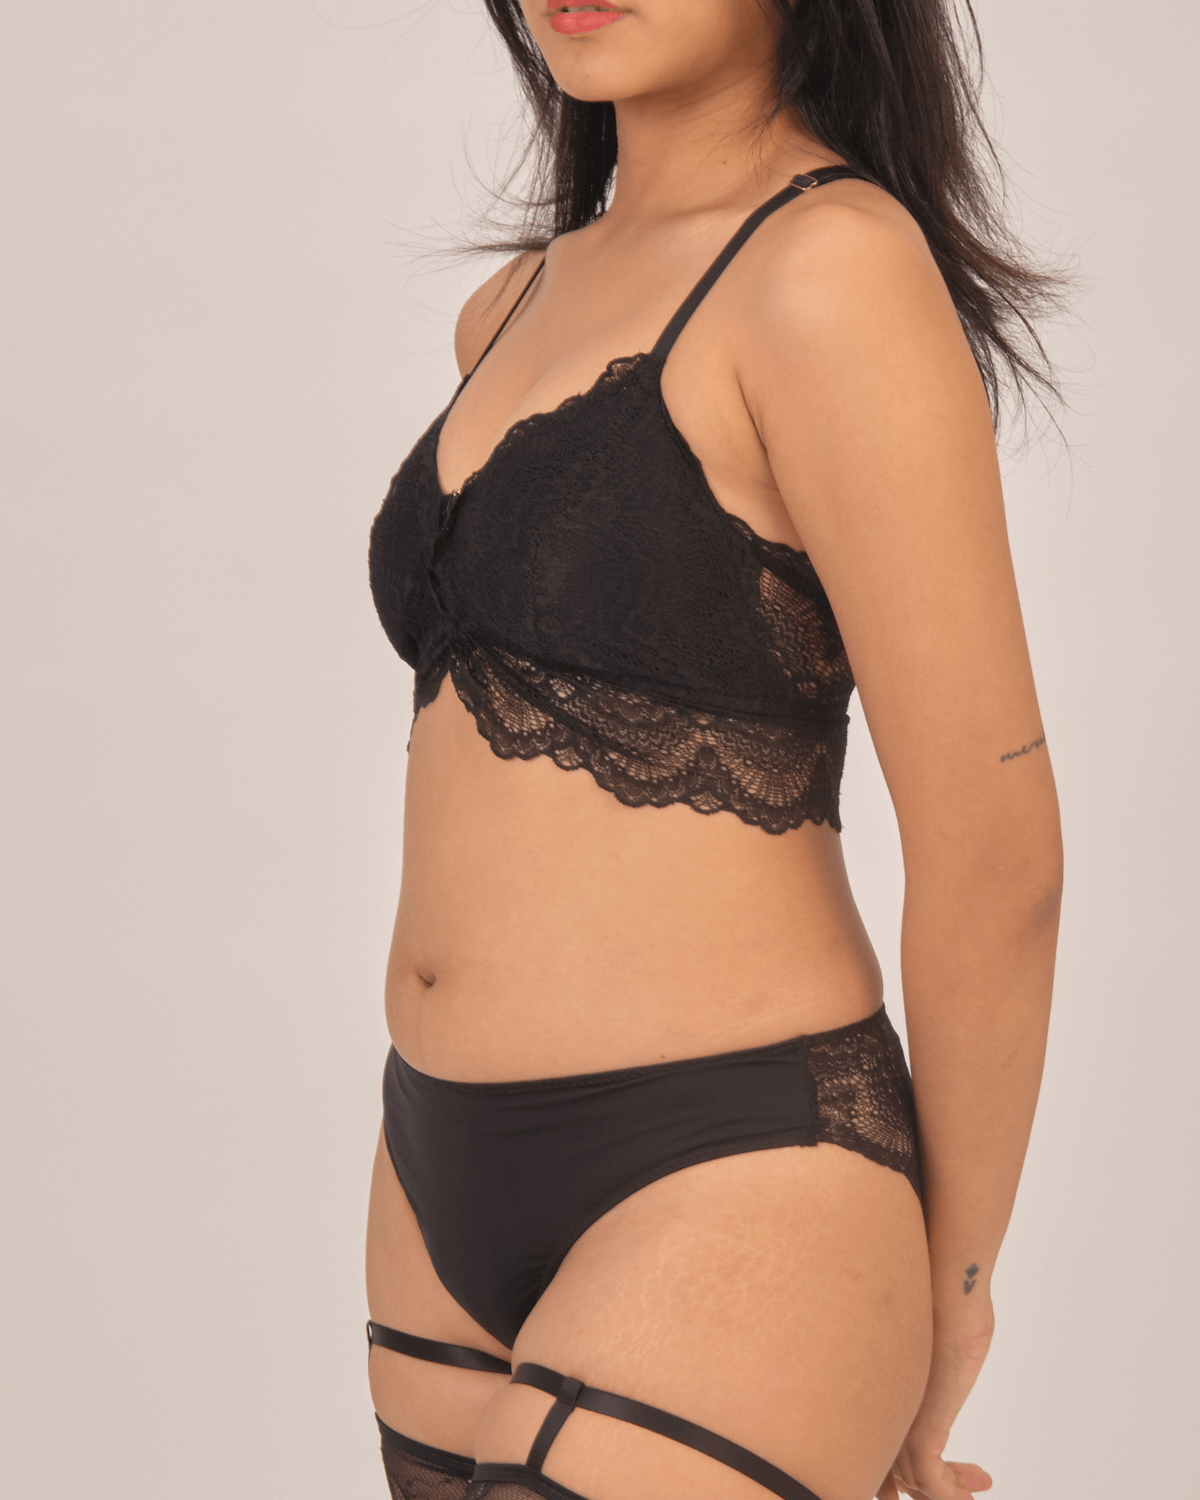 best wishes front close midi bralette in onyx – Our Bralette Club